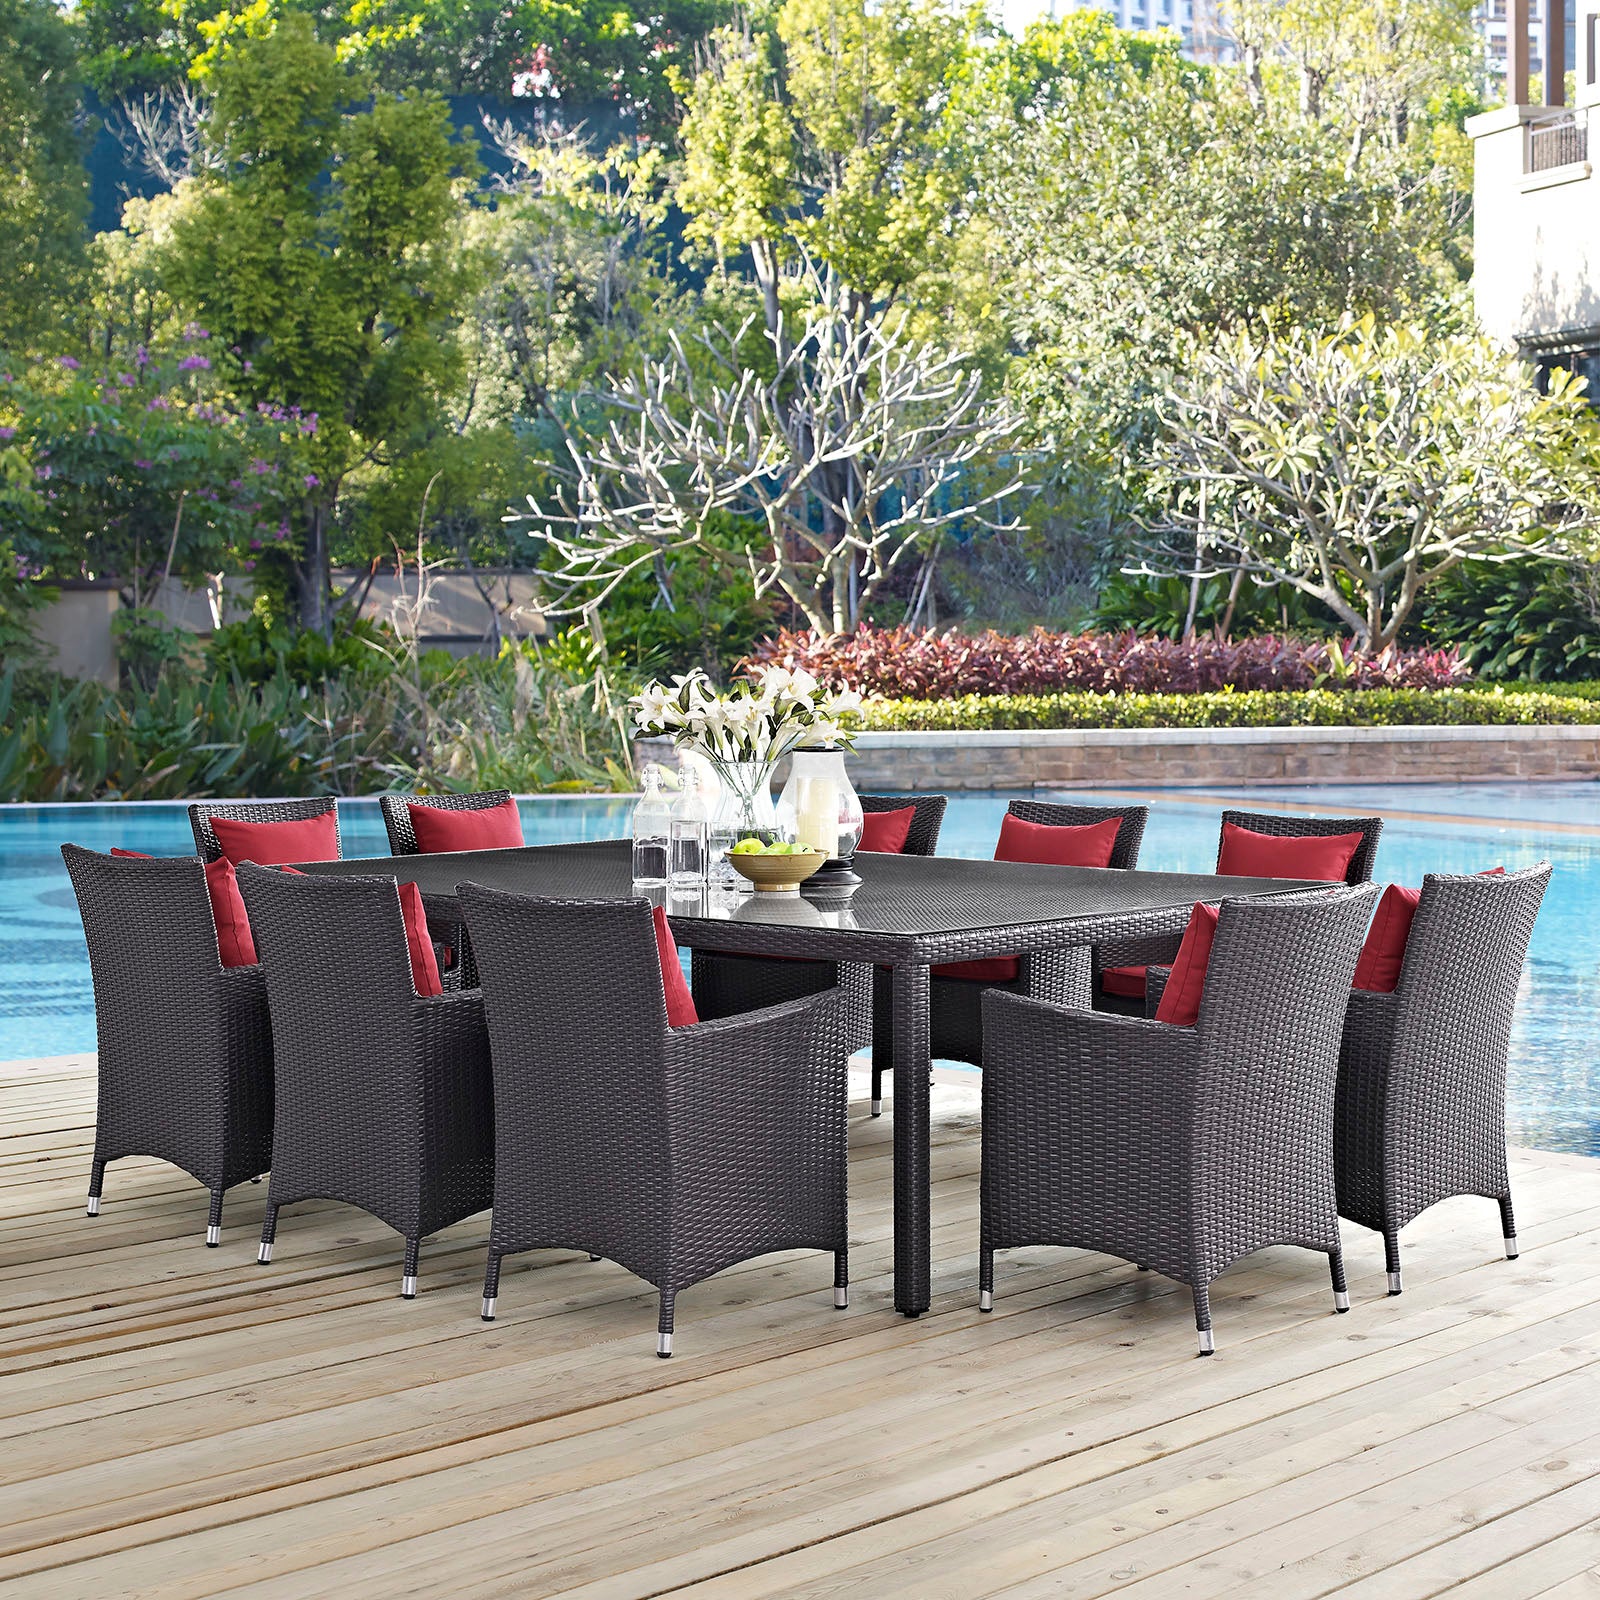 Modway Outdoor Dining Sets - Convene 11 Piece Outdoor Patio Dining Set Espresso Red